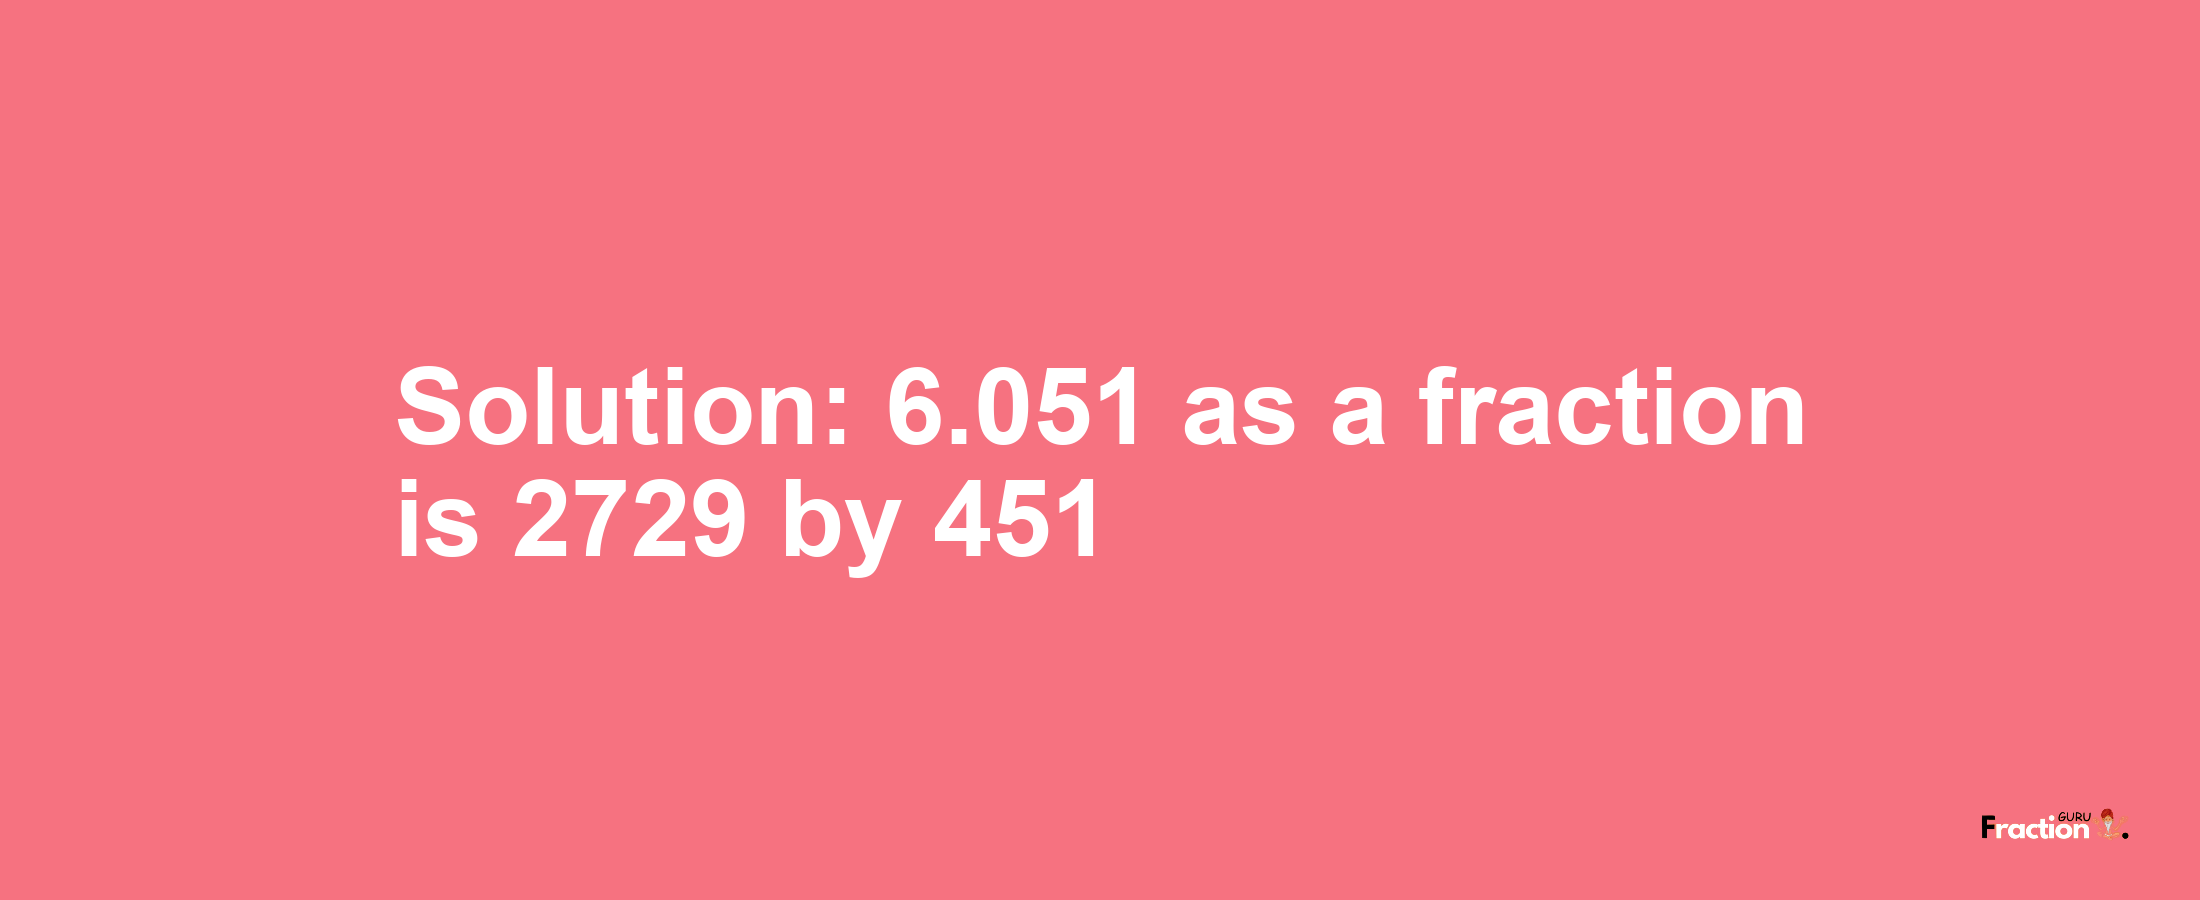 Solution:6.051 as a fraction is 2729/451